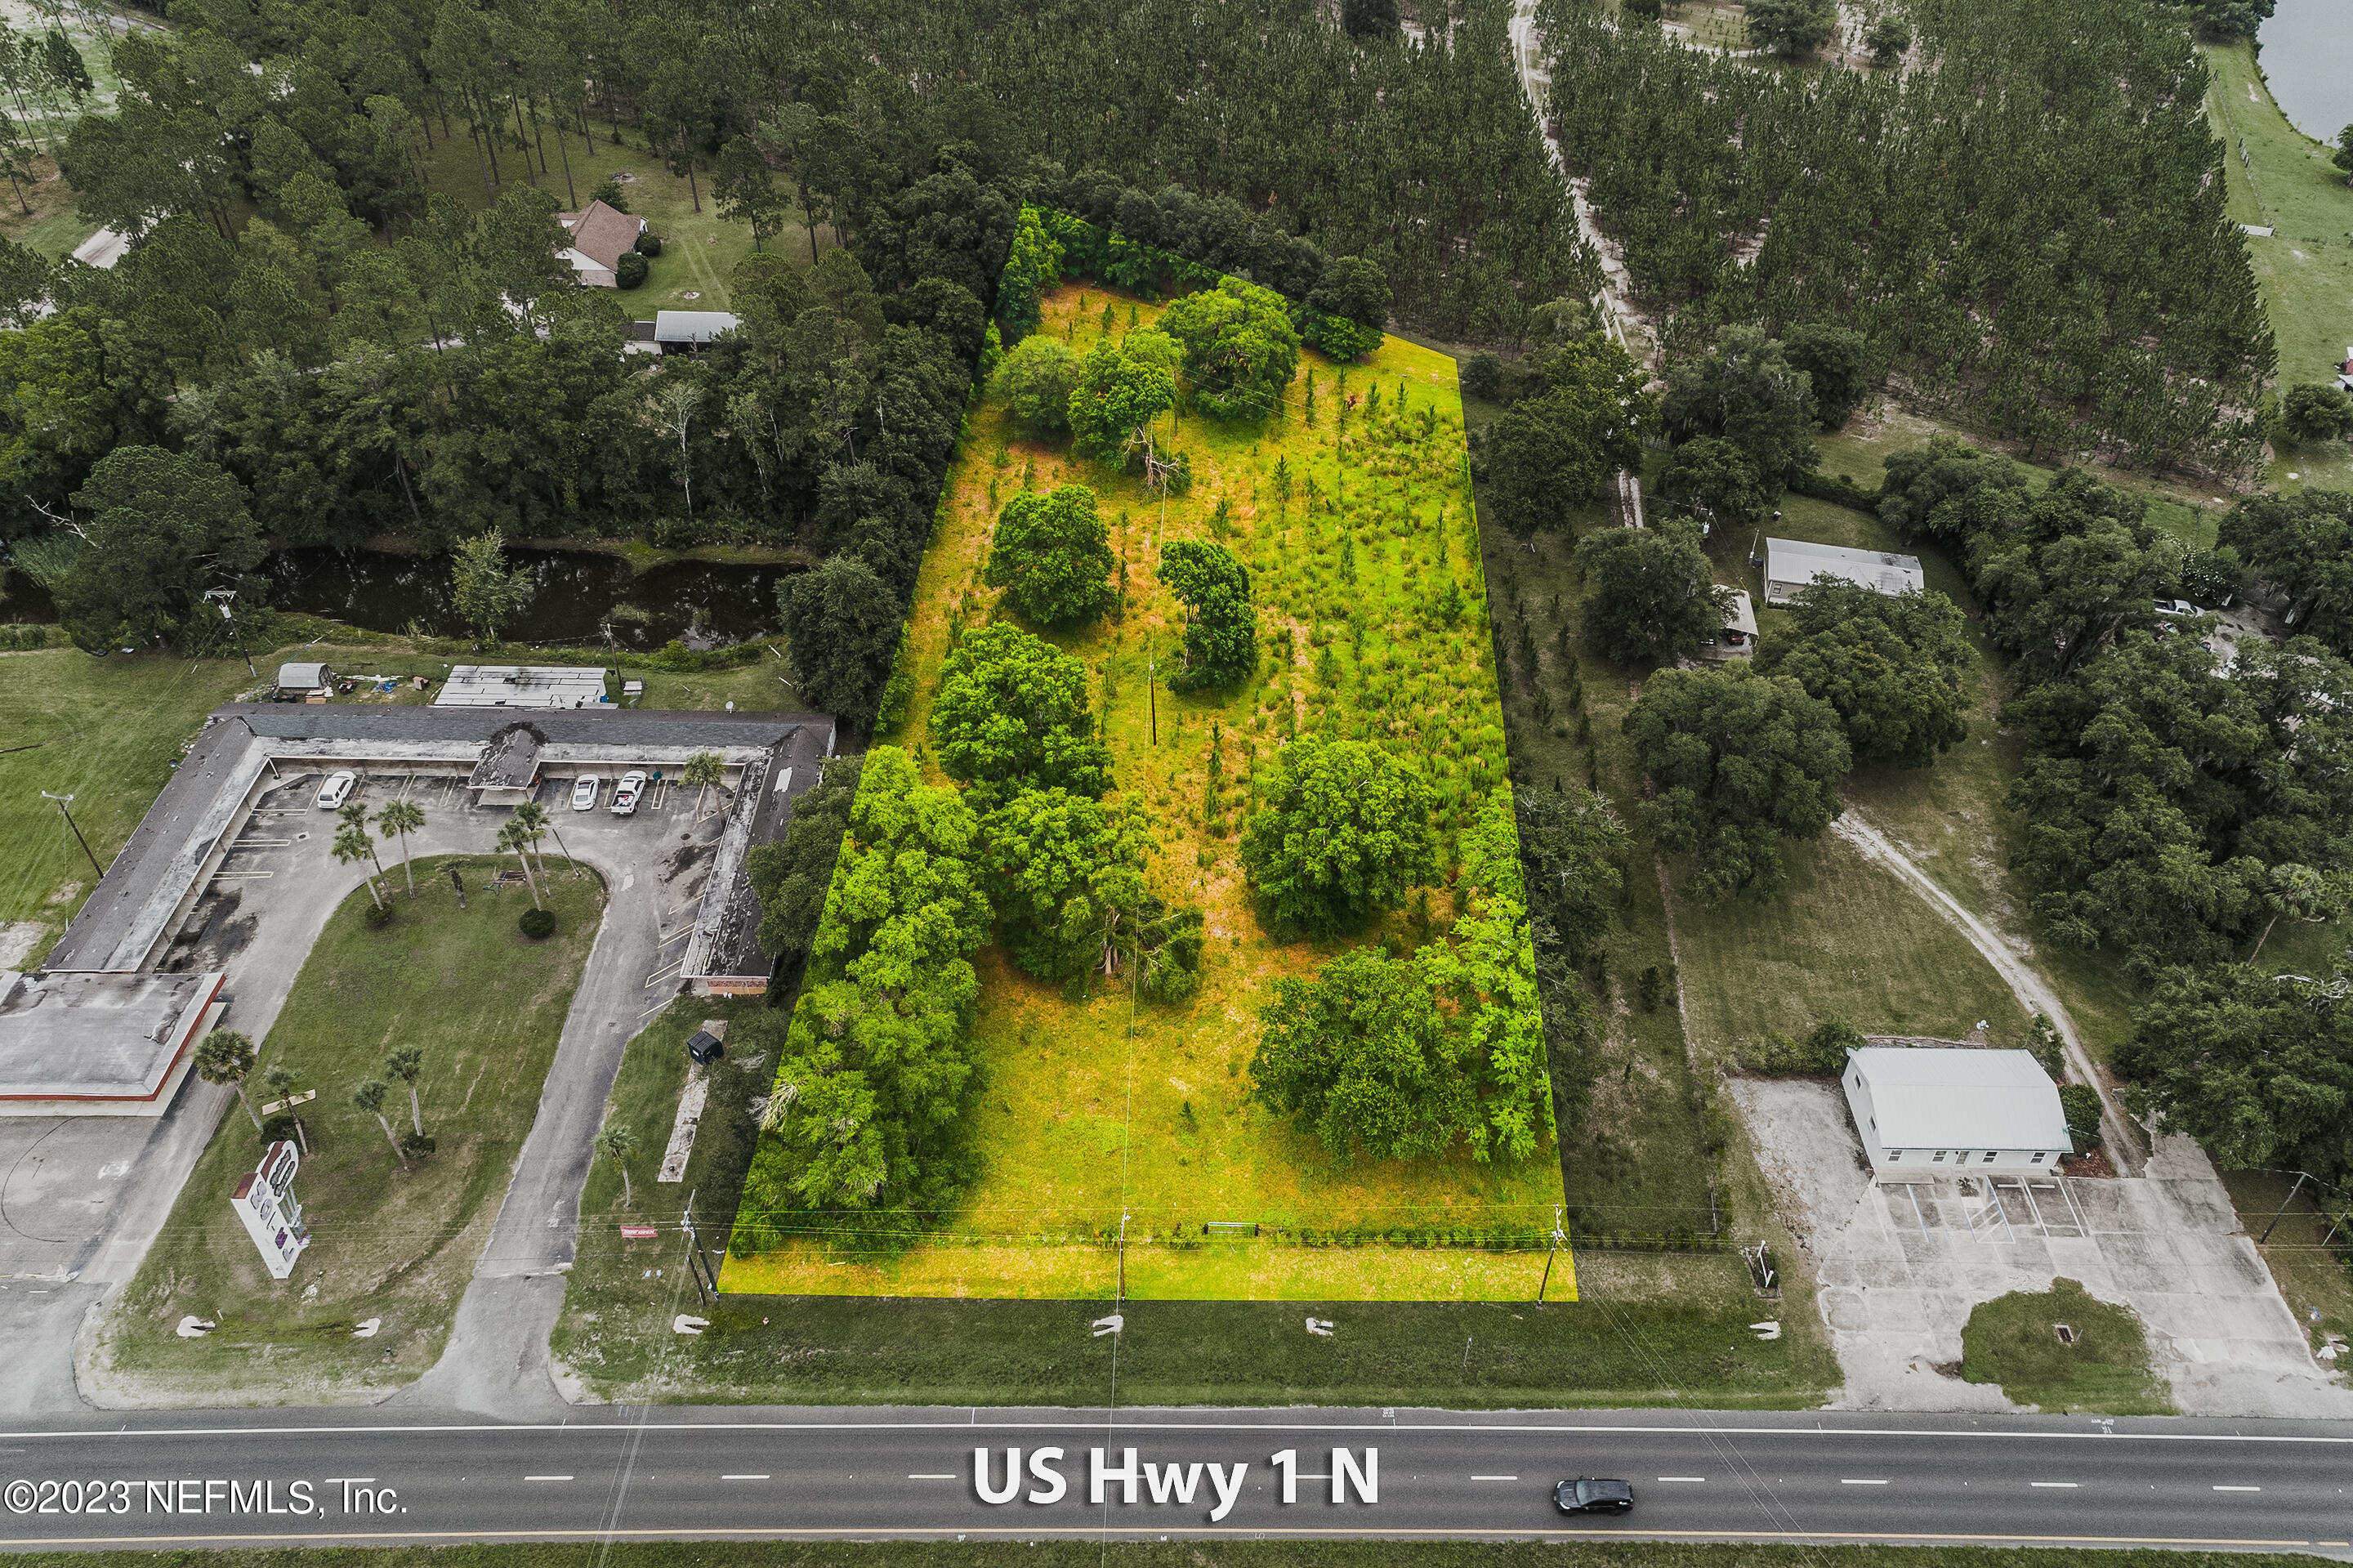 Hilliard, FL home for sale located at 0 Us Highway 1, Hilliard, FL 32046